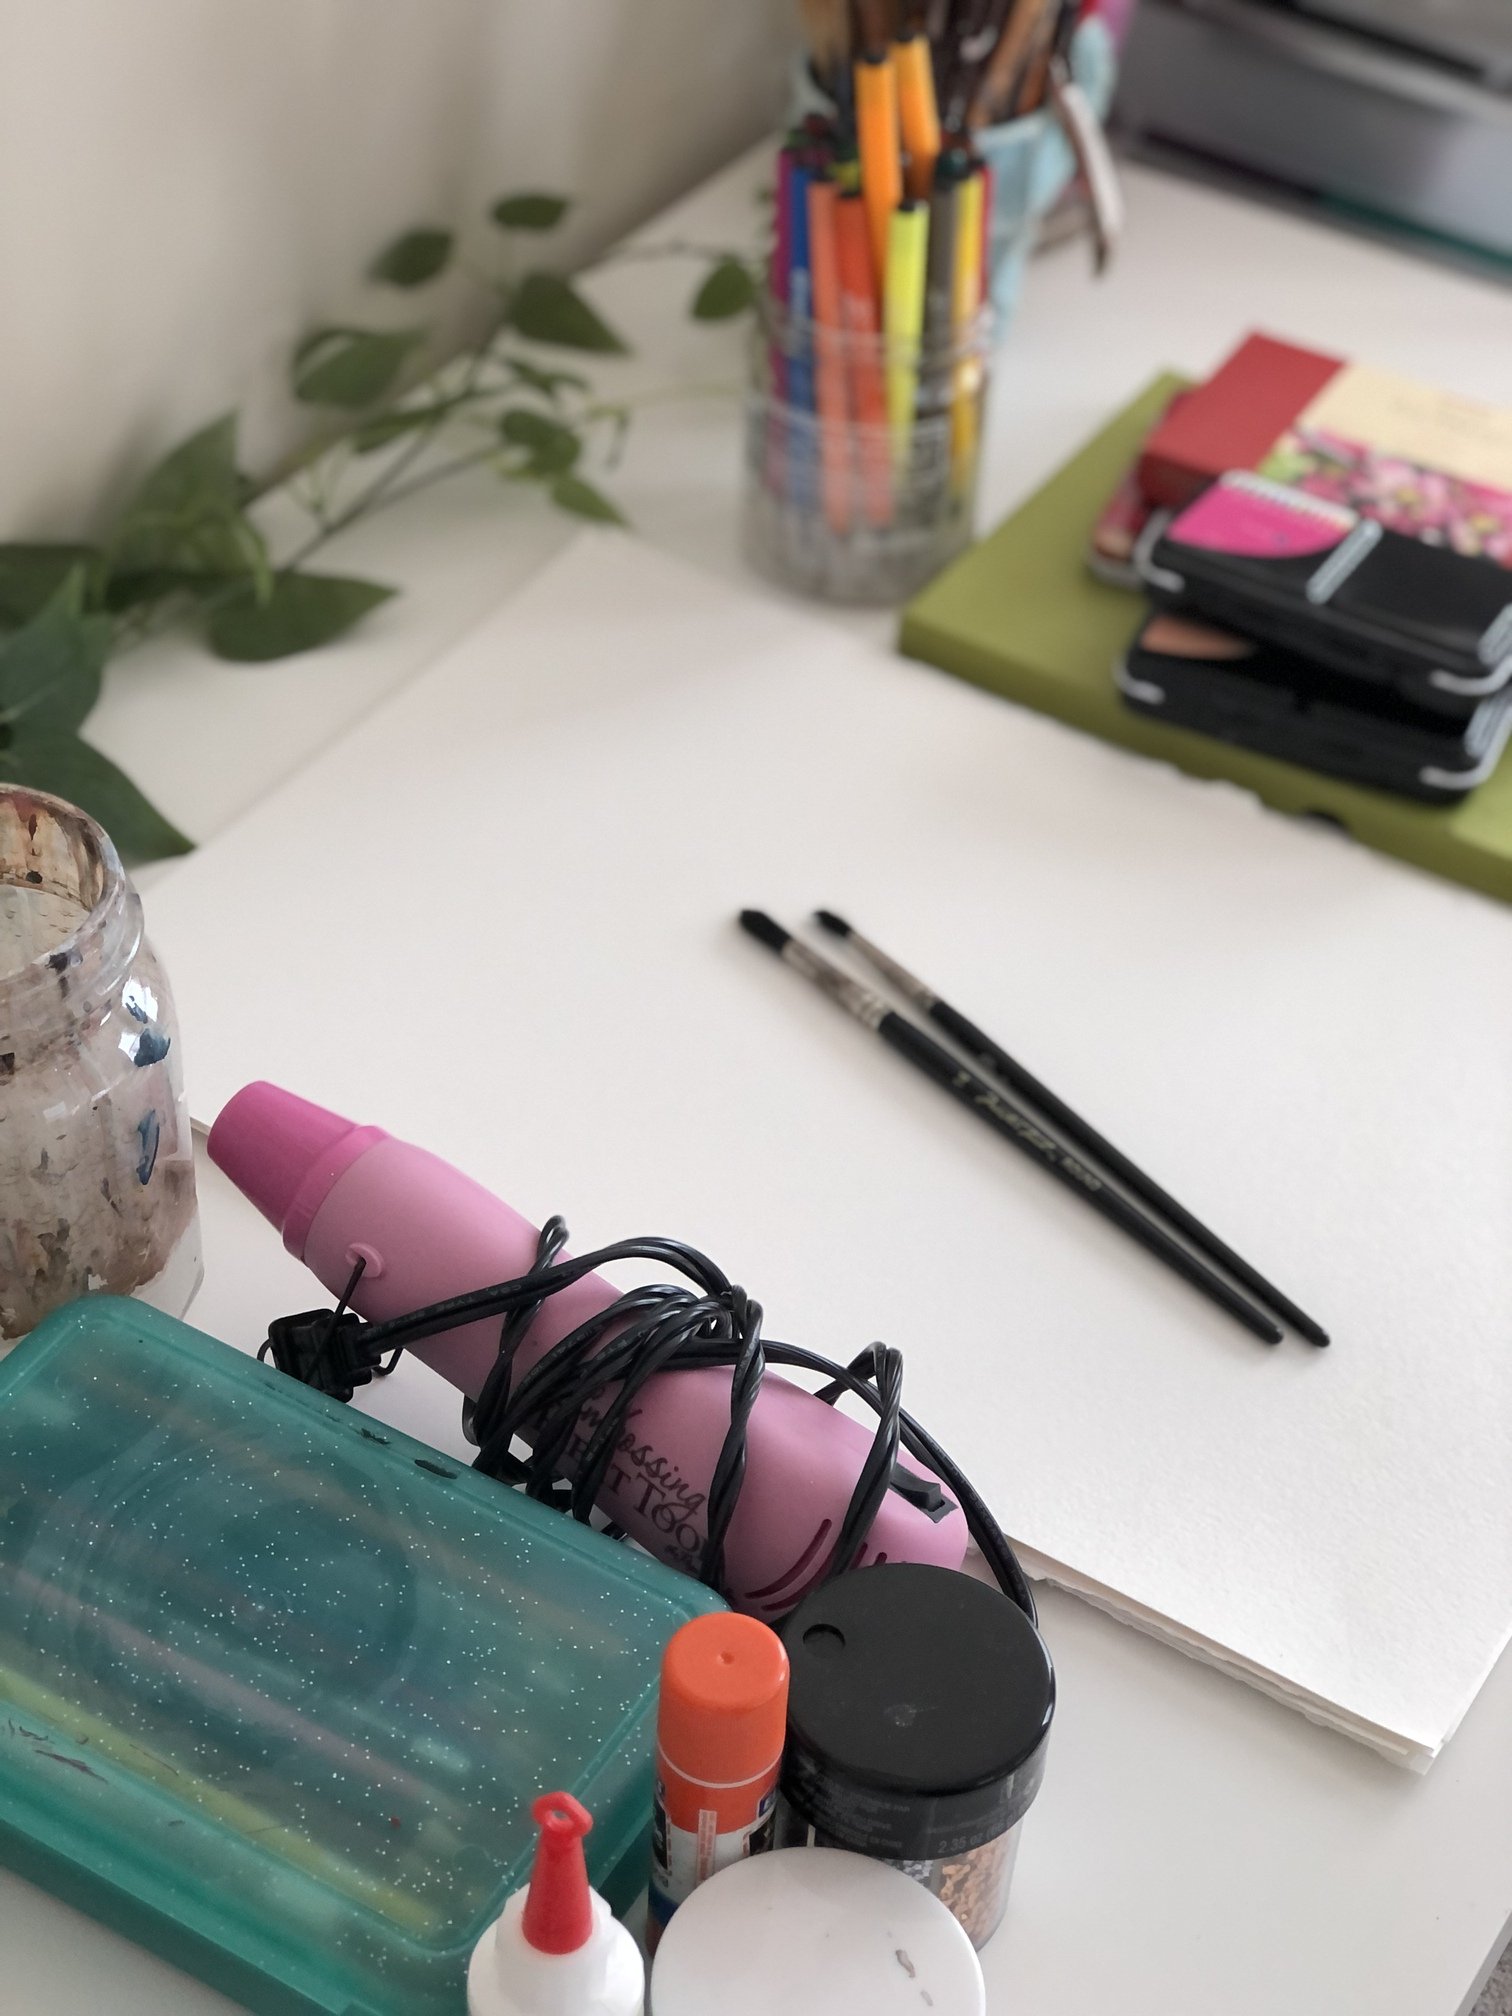 Watercolor Art Journaling 101: The Essential Supply List — A